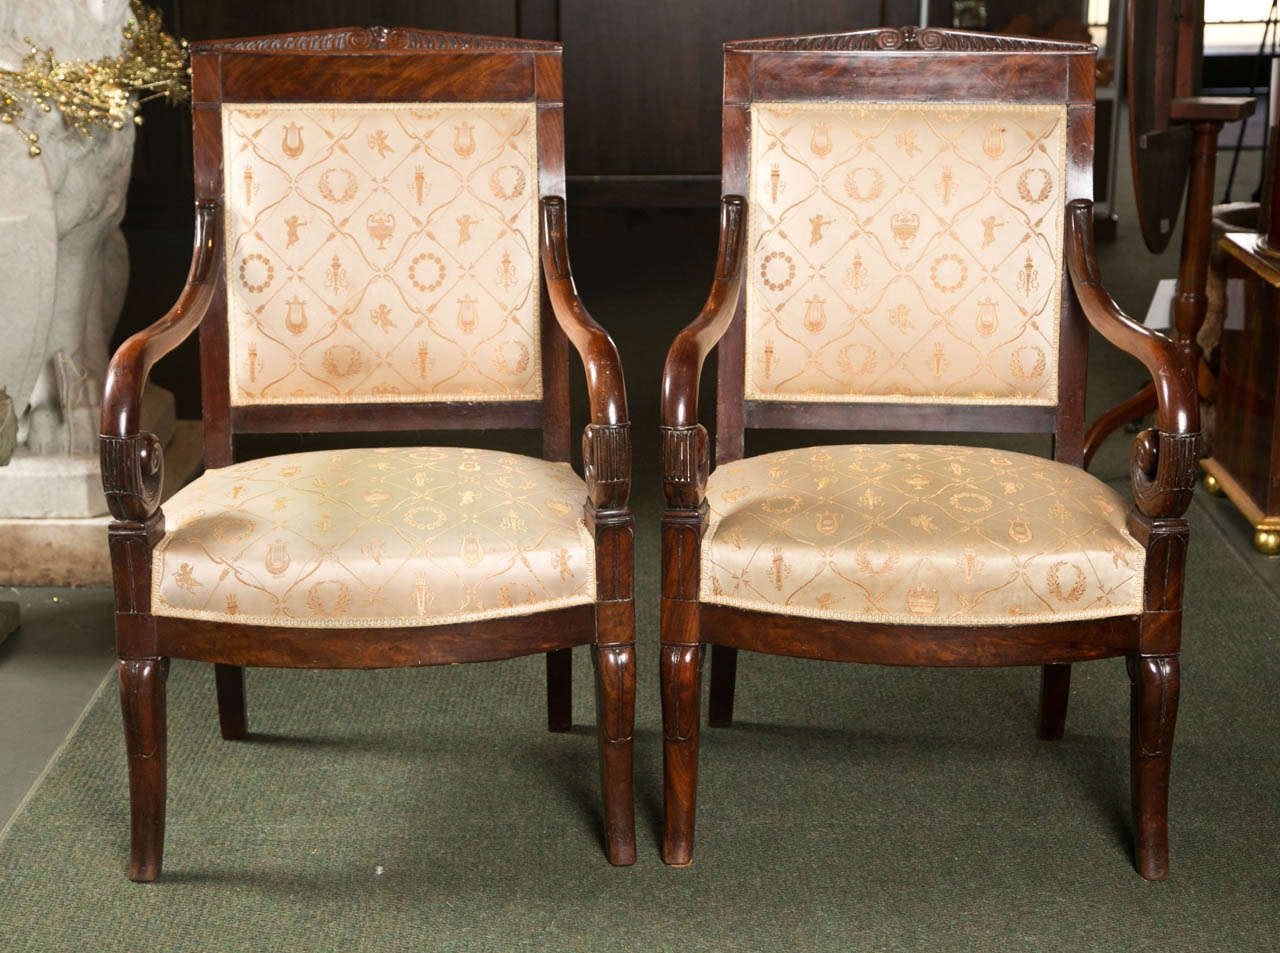 A magnificent pair of Charles X mahogany nicely carved fauteuils with great upholstery.